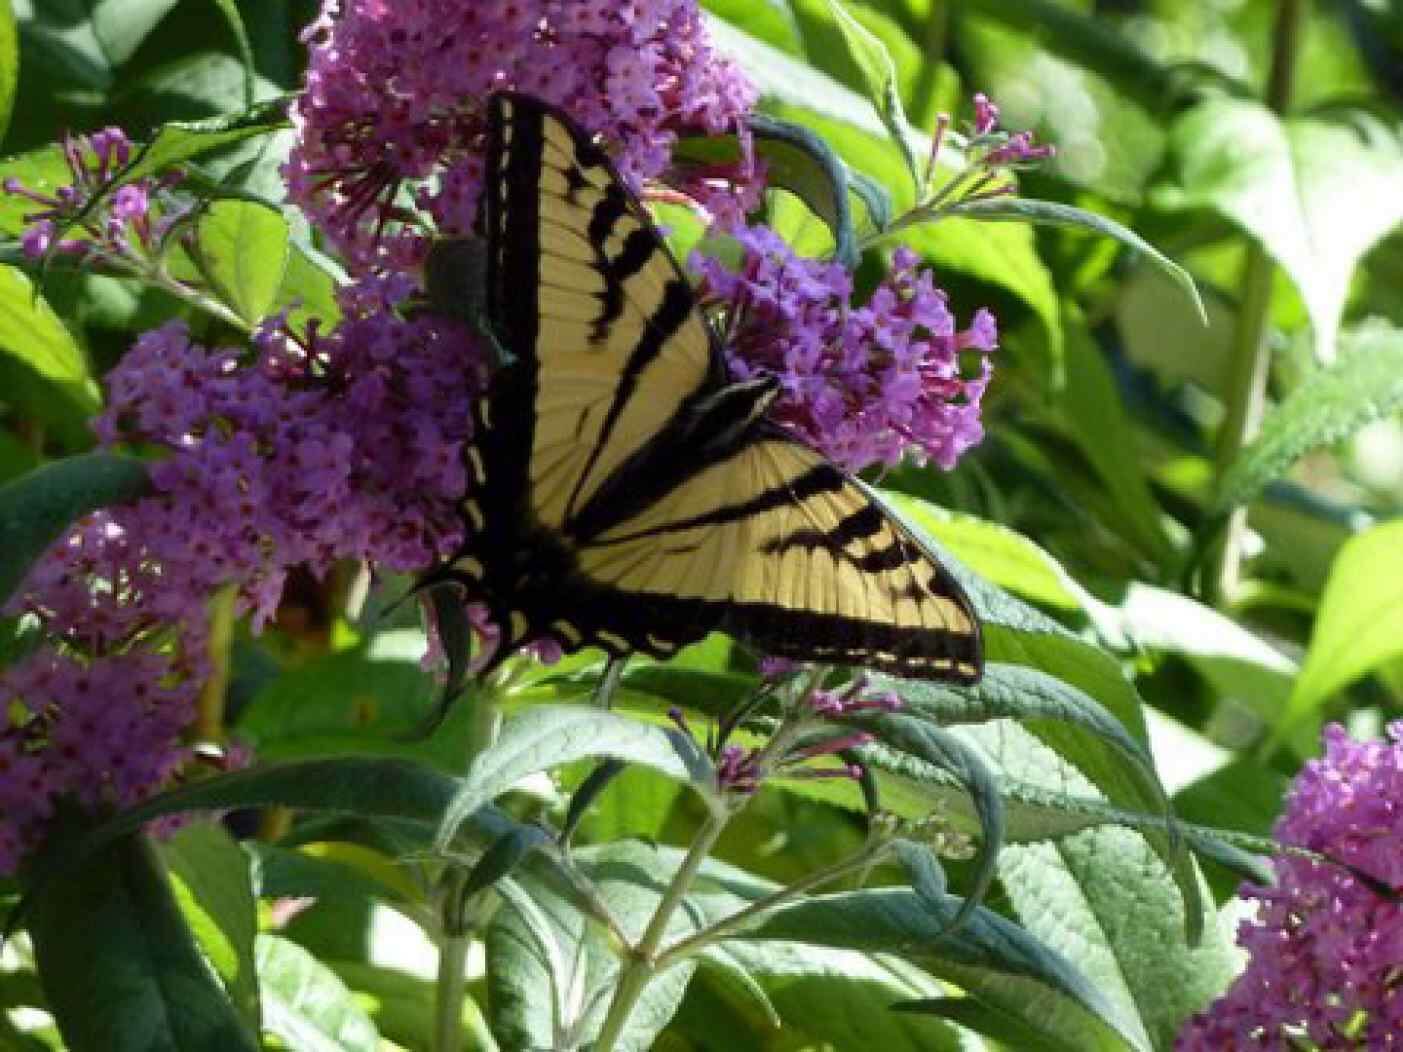 Western Tiger Swallowtail sipping nectar from Buddleia flowers. Photo: Nancy Brown